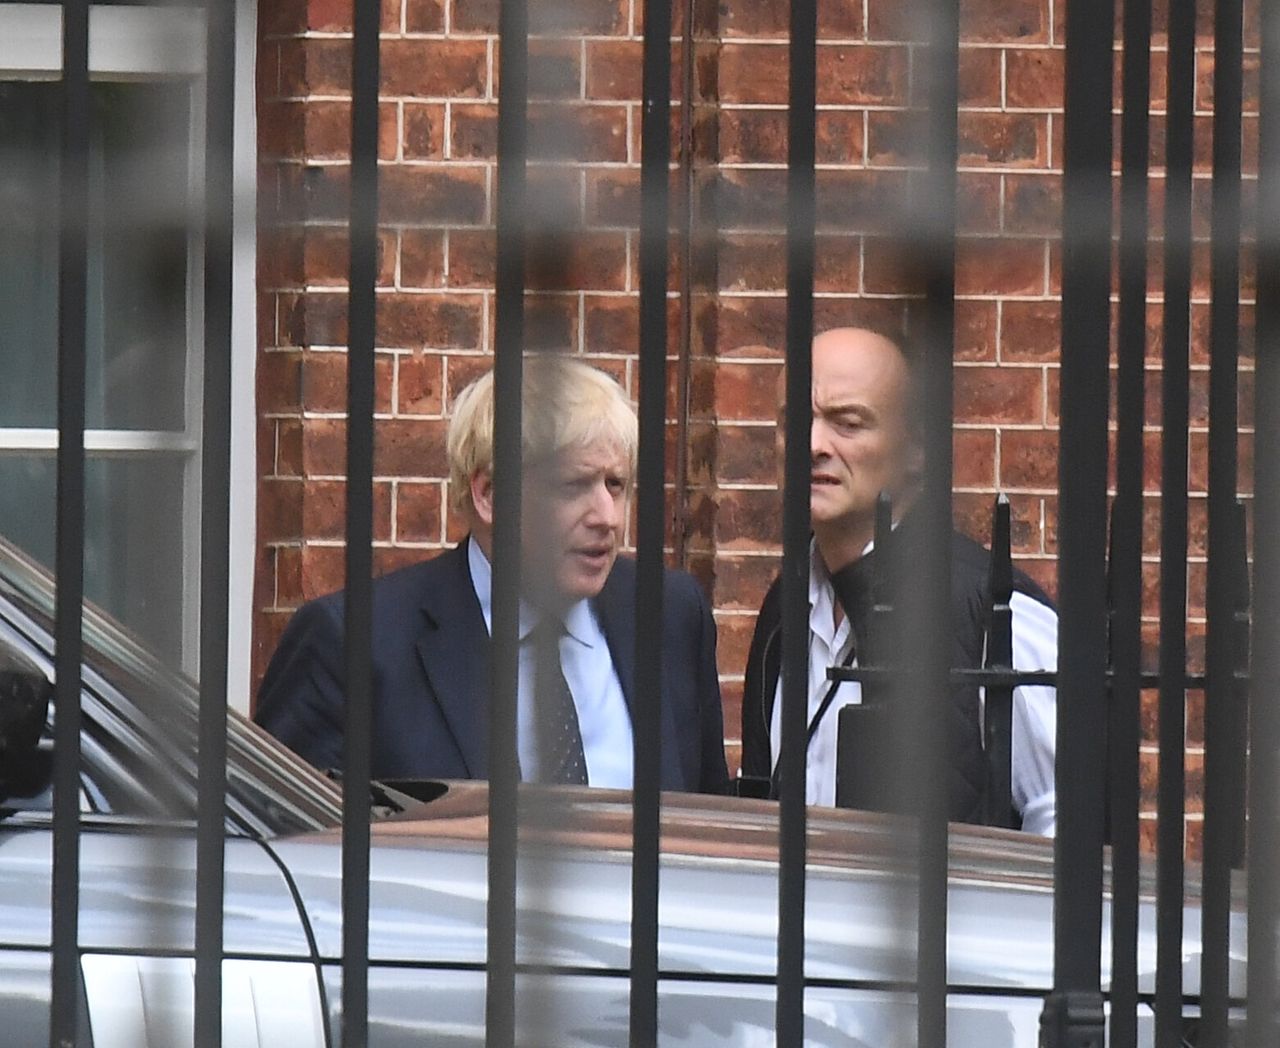 Prime Minister Boris Johnson with his senior aid Dominic Cummings as they leave Downing Street, central London.